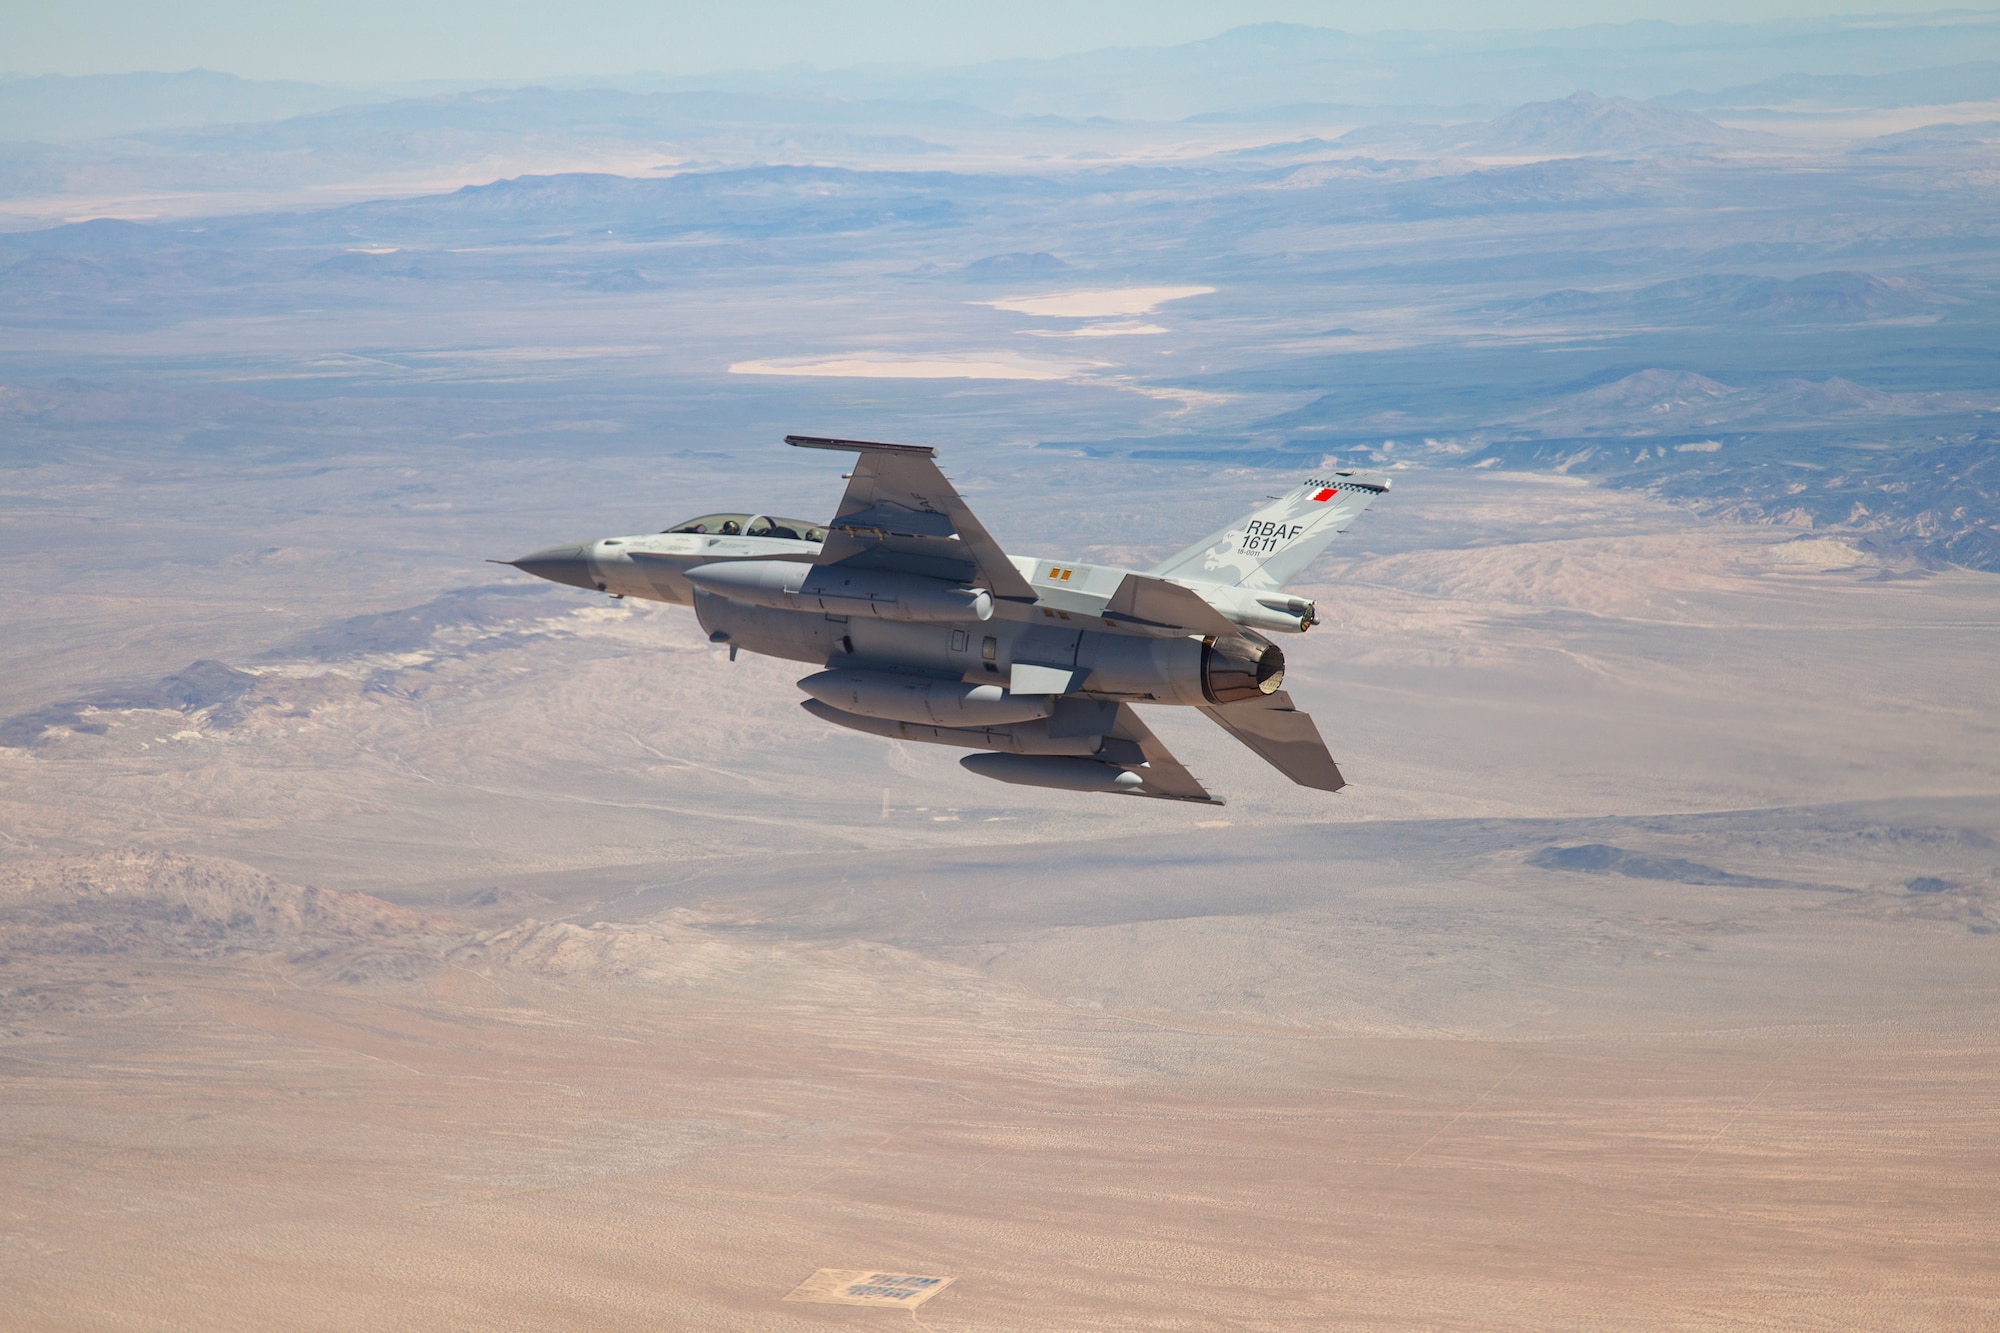 The first Royal Bahraini Air Force F-16 Block 70 flies in the skies above Southern California before landing at Edwards Air Force Base, California, March 28. The first-of-its-kind aircraft departed the Lockheed Martin facility in Greenville, South Carolina, before flying cross-country to Edwards AFB. (Photo courtesy of 412th Test Wing Public Affairs, US Air Force)